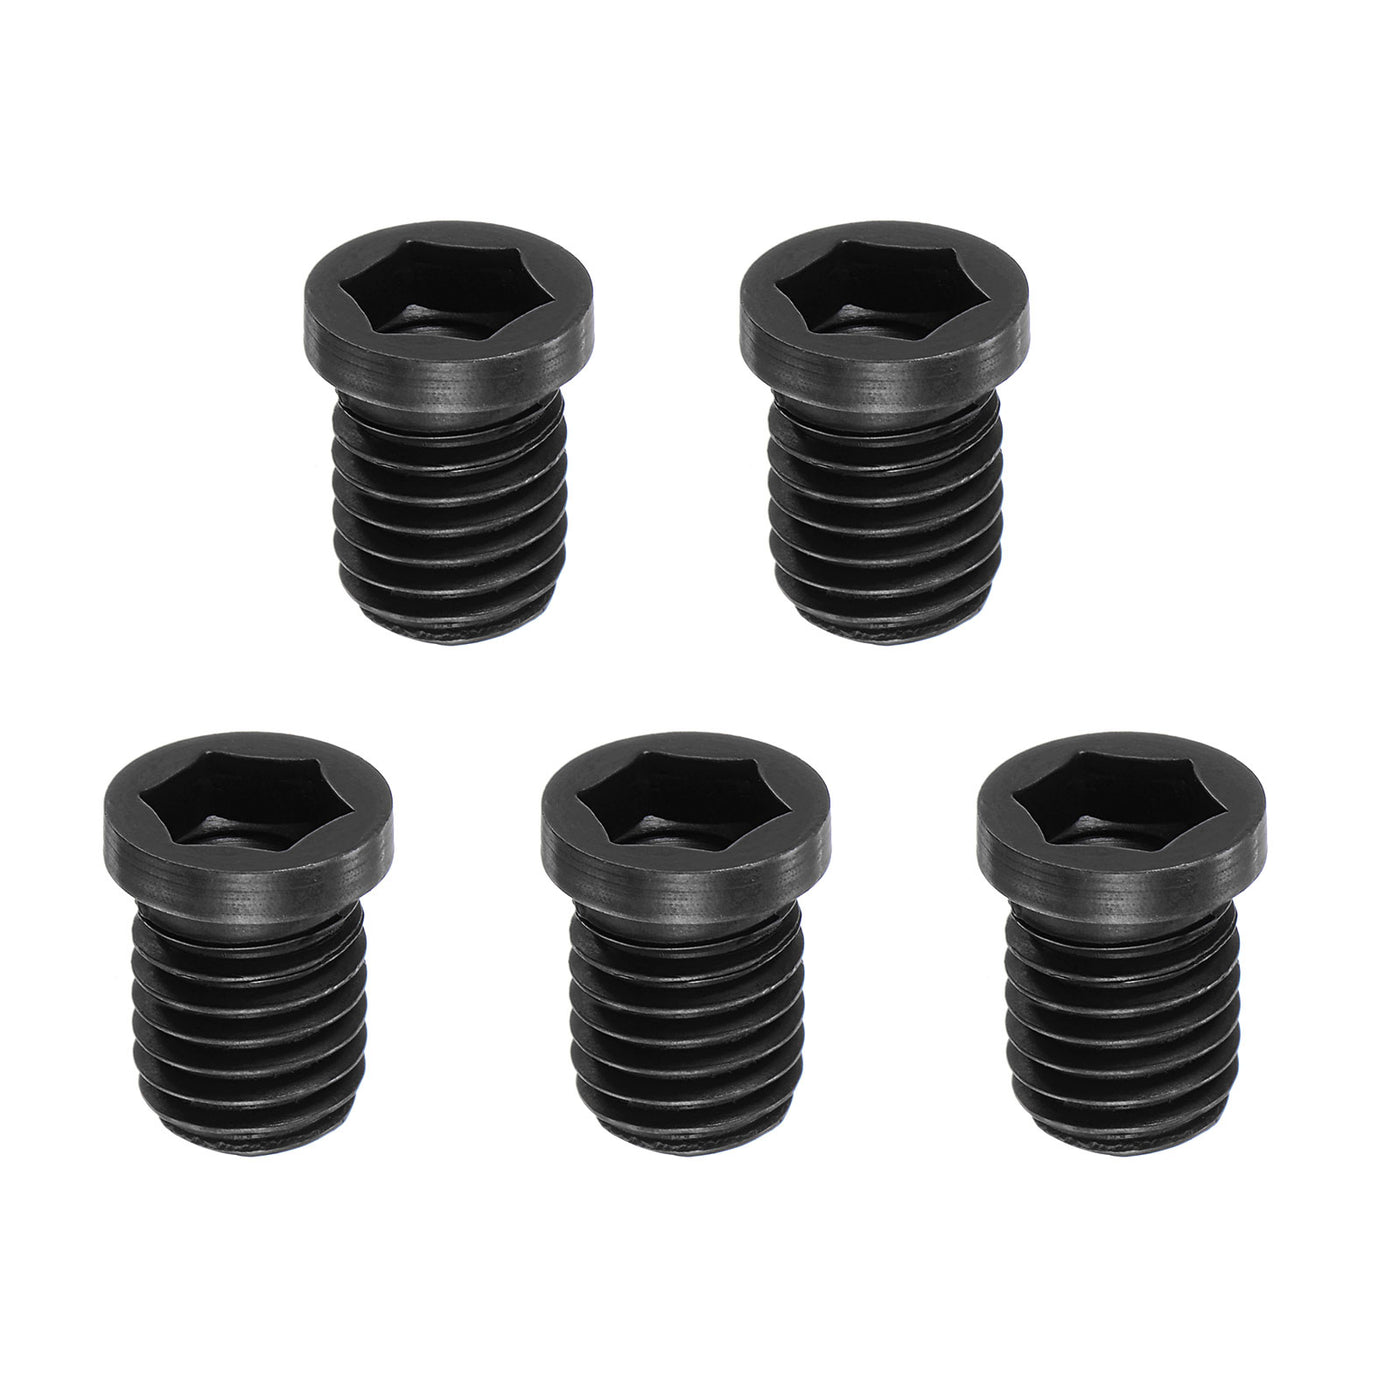 Uxcell Uxcell M7x10-1 Set Screws for Carbide Insert CNC Lathe Turning Tool Holder, 5Pcs